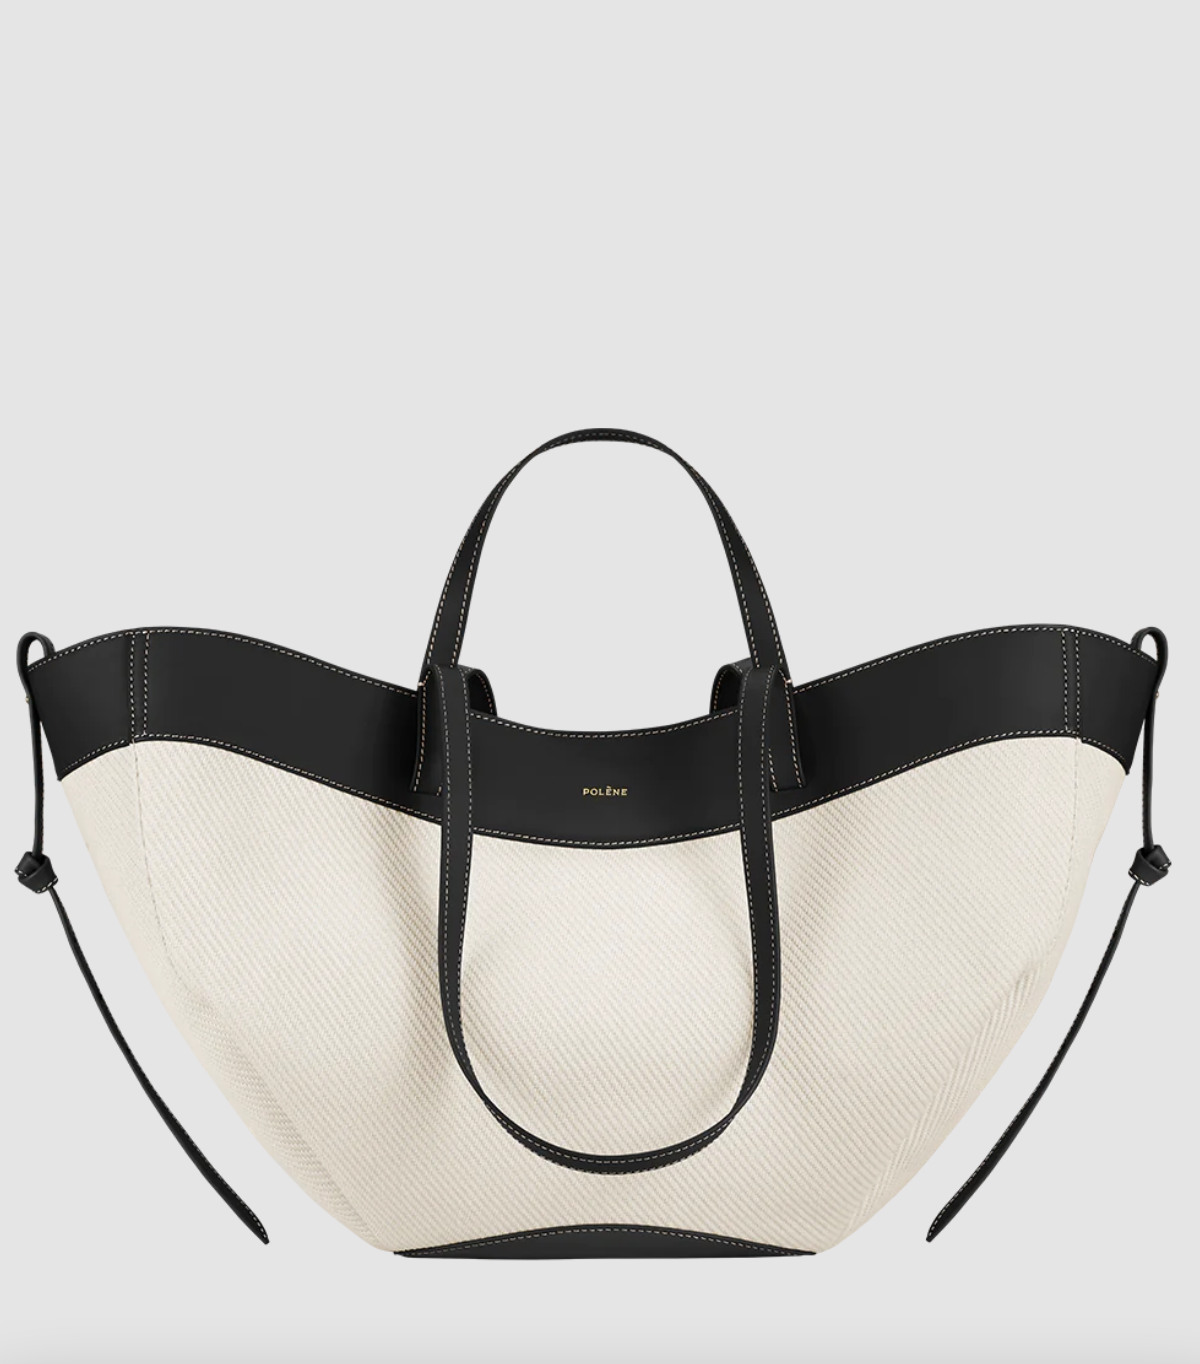 Mansur Gavriel's Limited Edition Summer Tote by Pascucci - BagAddicts  Anonymous